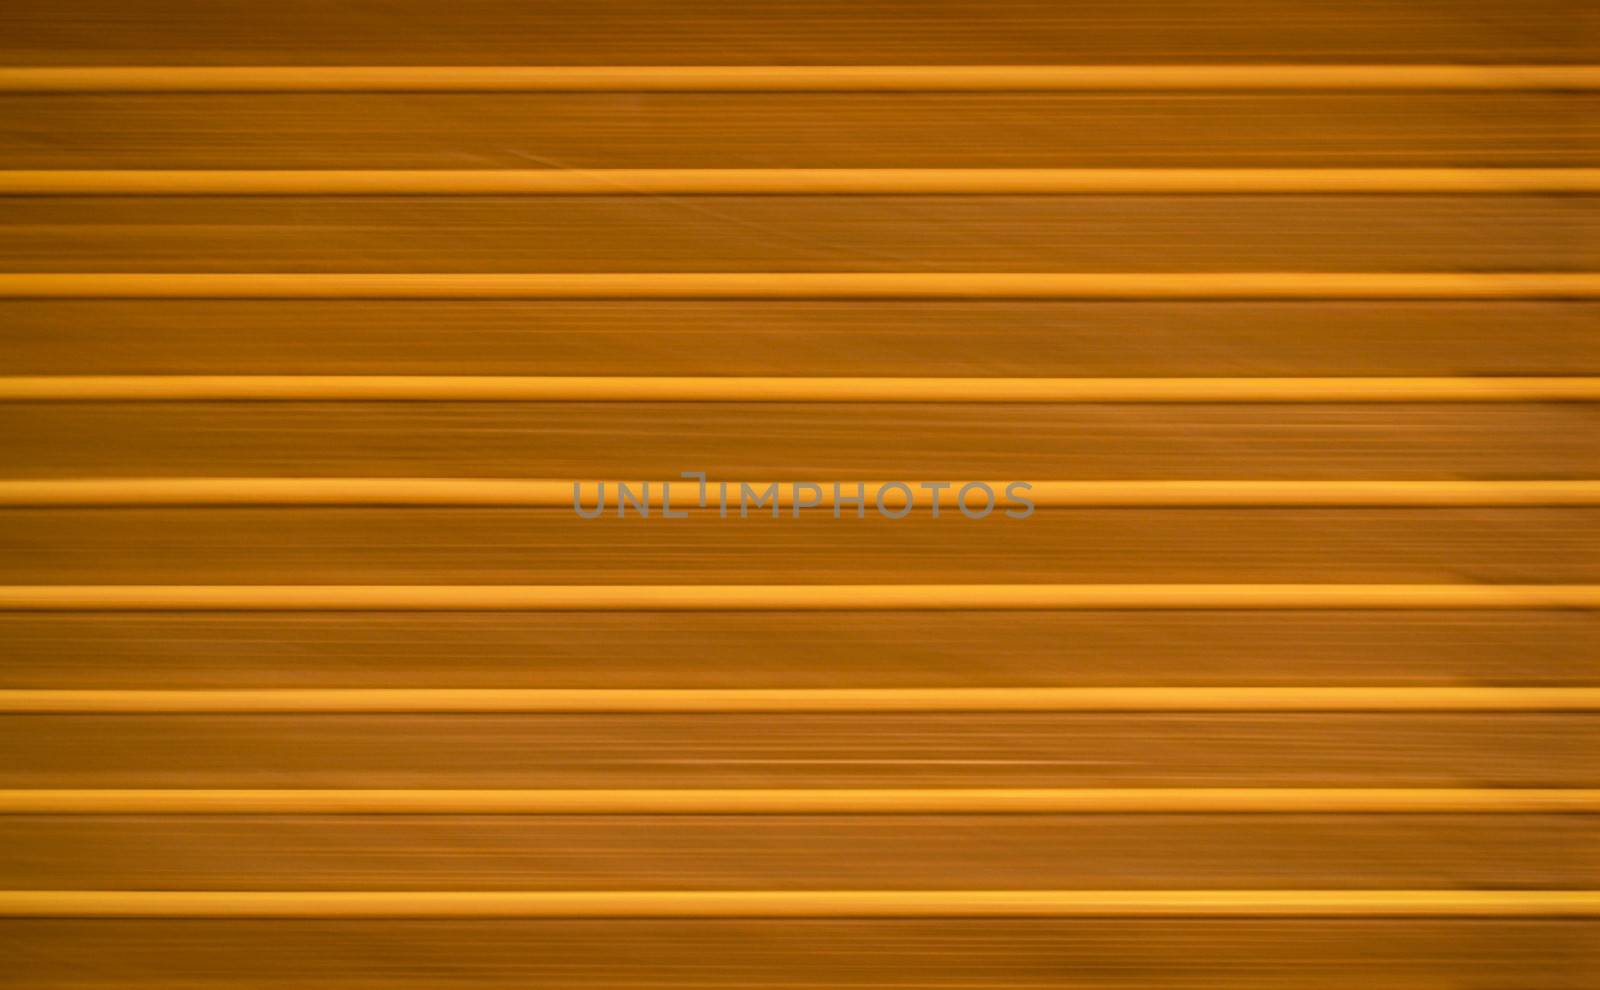 abstract background or texture blurred wooden horizontal slats brown color